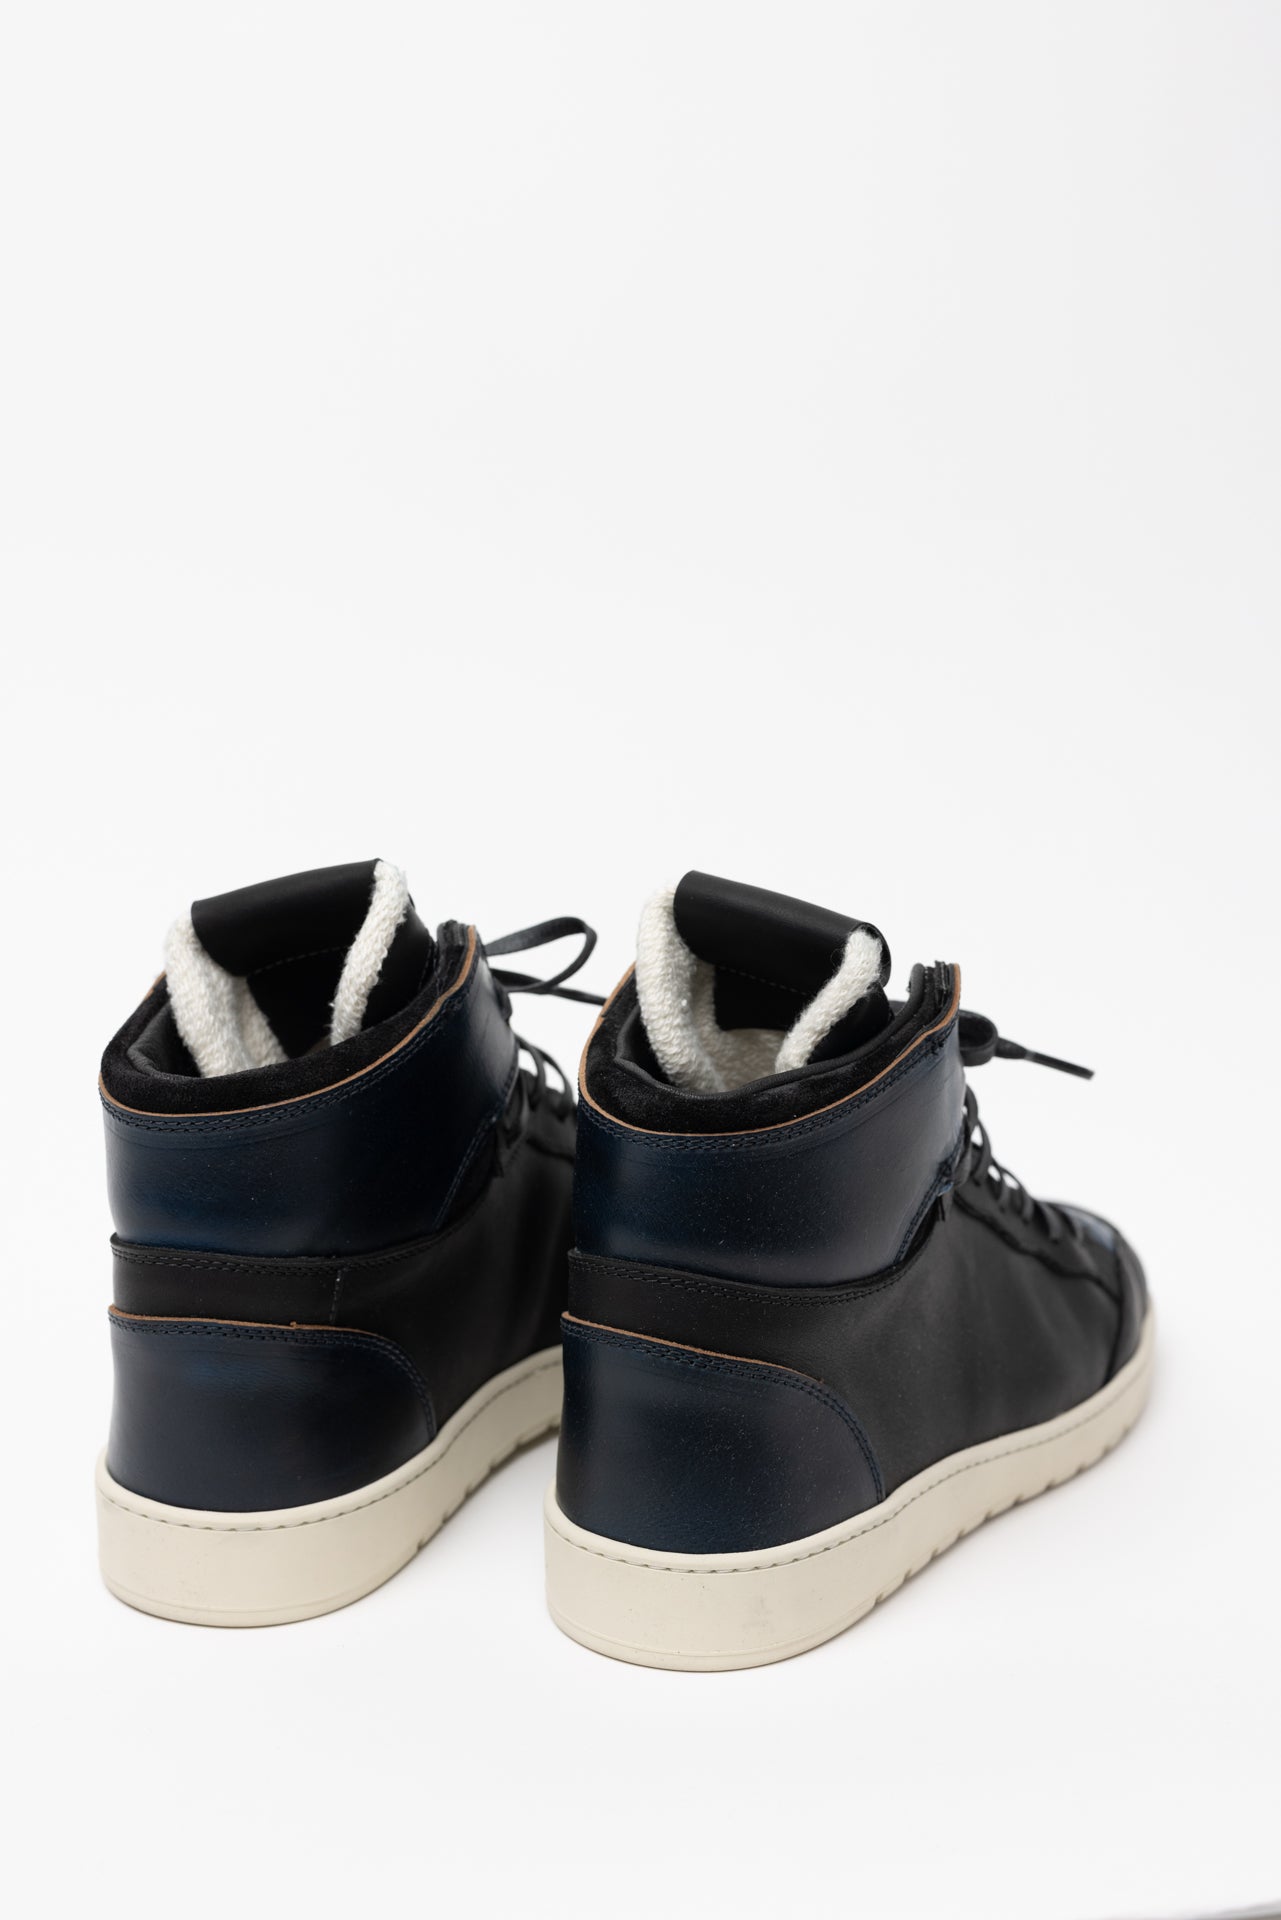 angle: Black Horween/Navy Chromexcel  black high top basketball shoes with black and blue leather